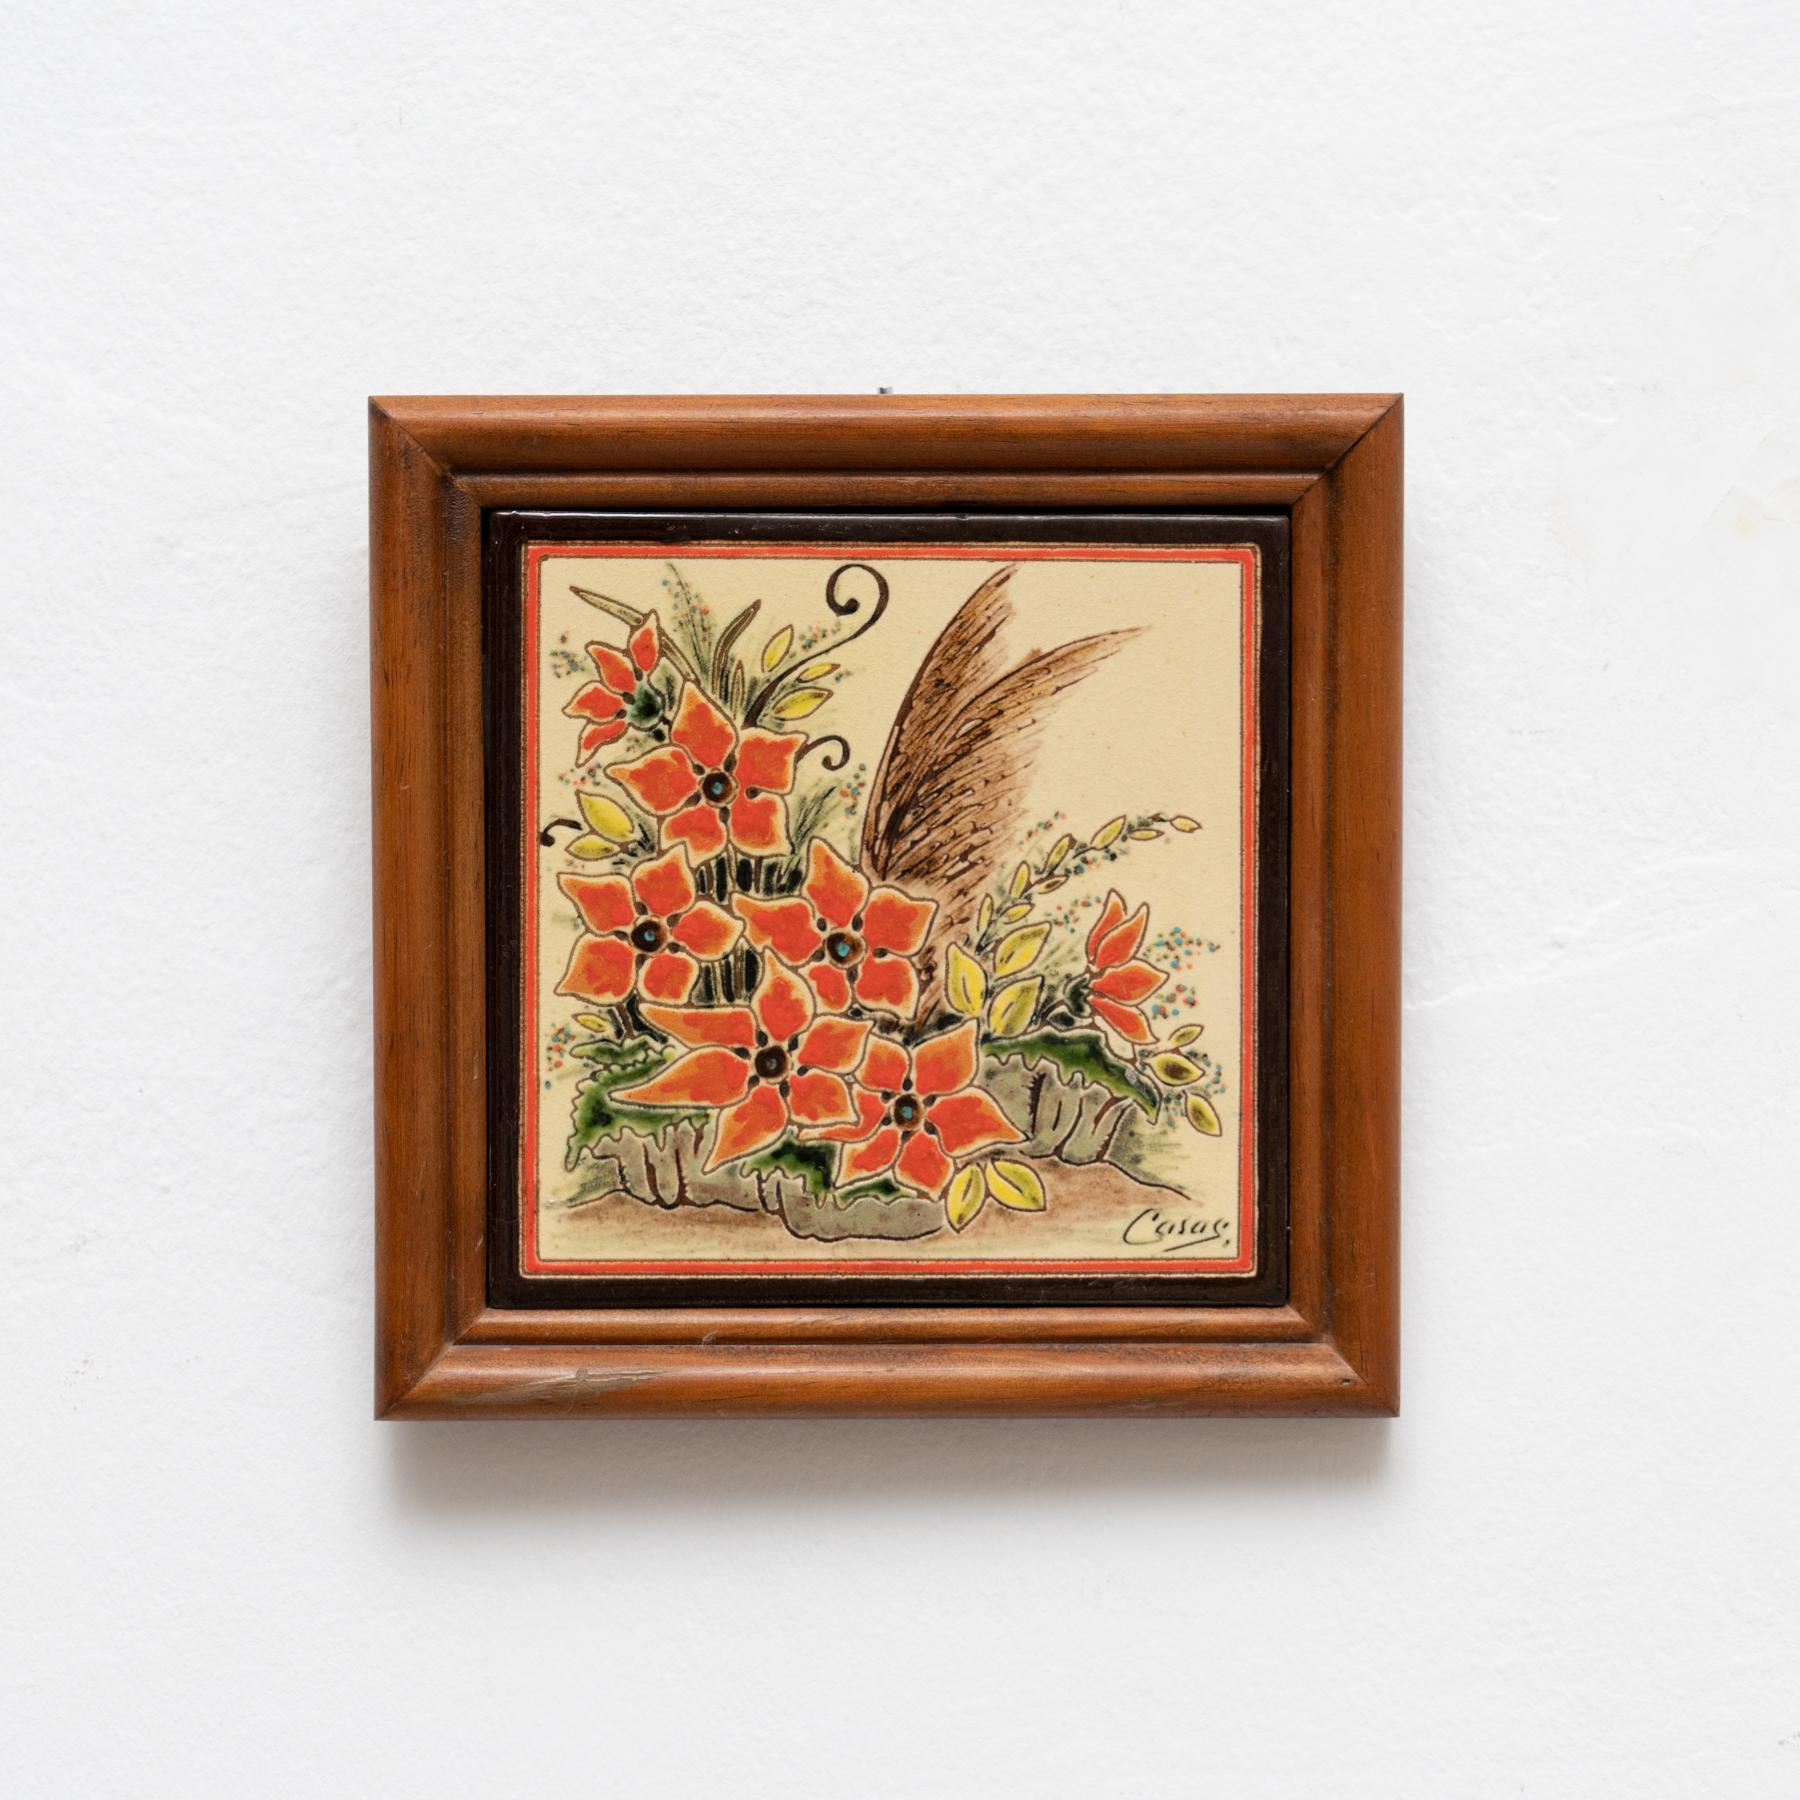 Ceramic hand painted floral artwork by Catalan artist Casas, circa 1960.
Framed. Signed.

In original condition, with minor wear consistent of age and use, preserving a beautiul patina.